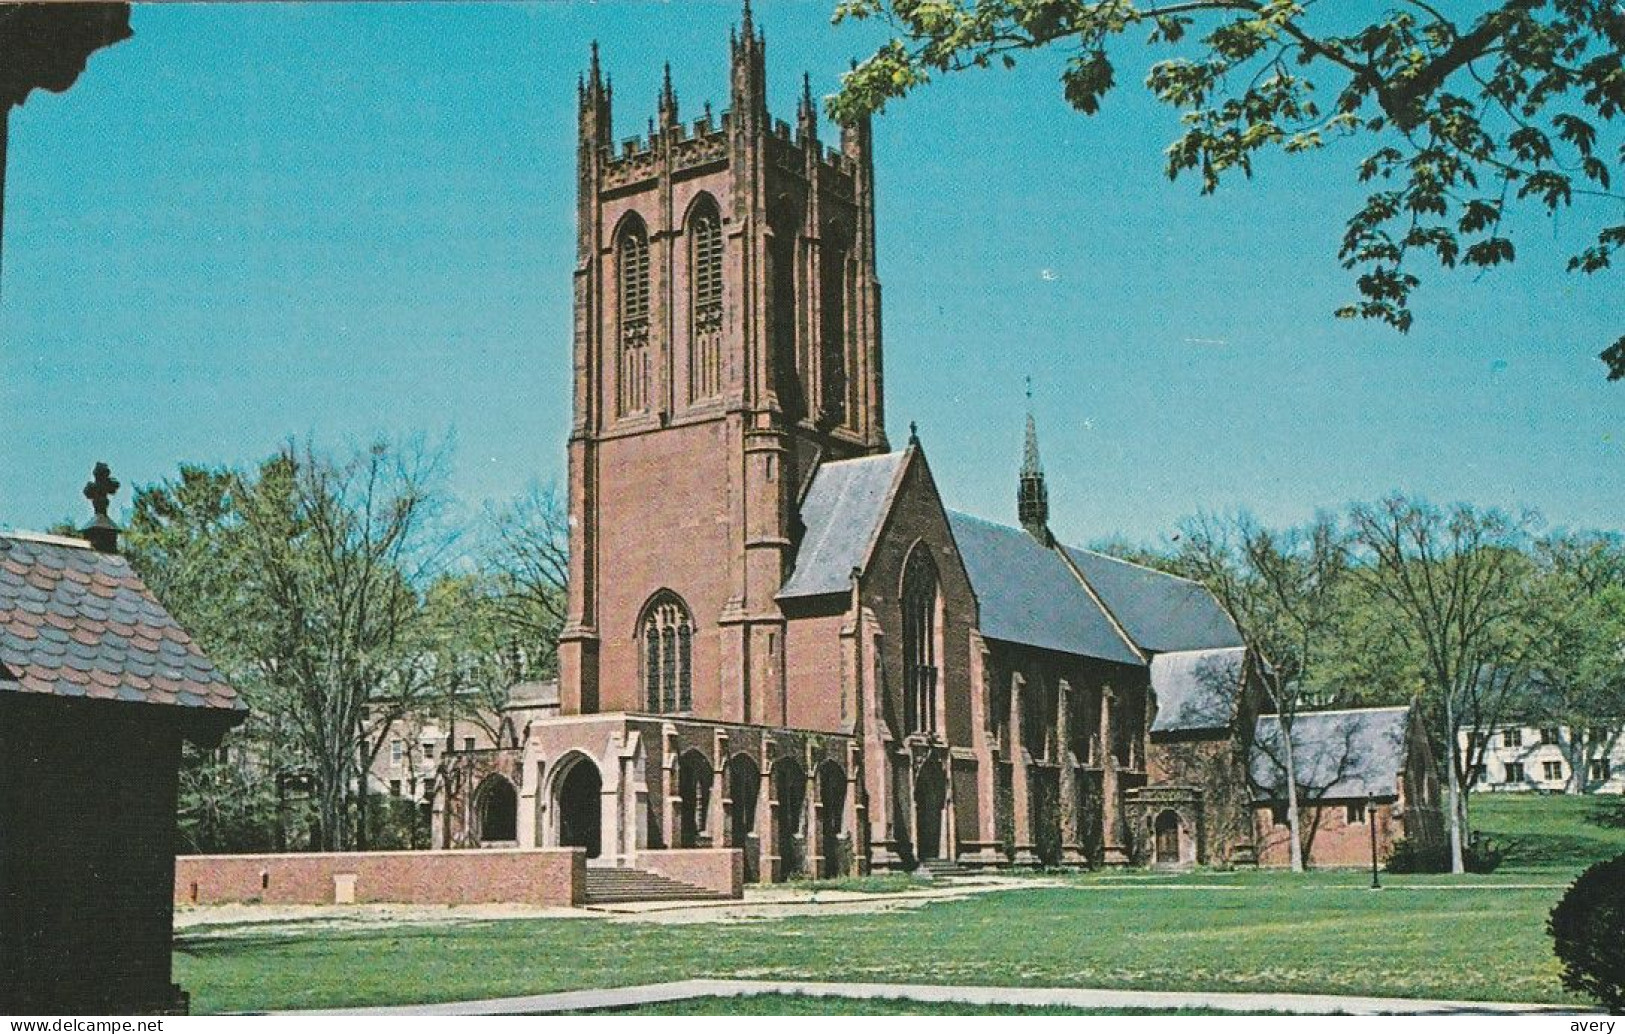 The Chapel St. Paul's School, Concord, New Hampshire - East Concord